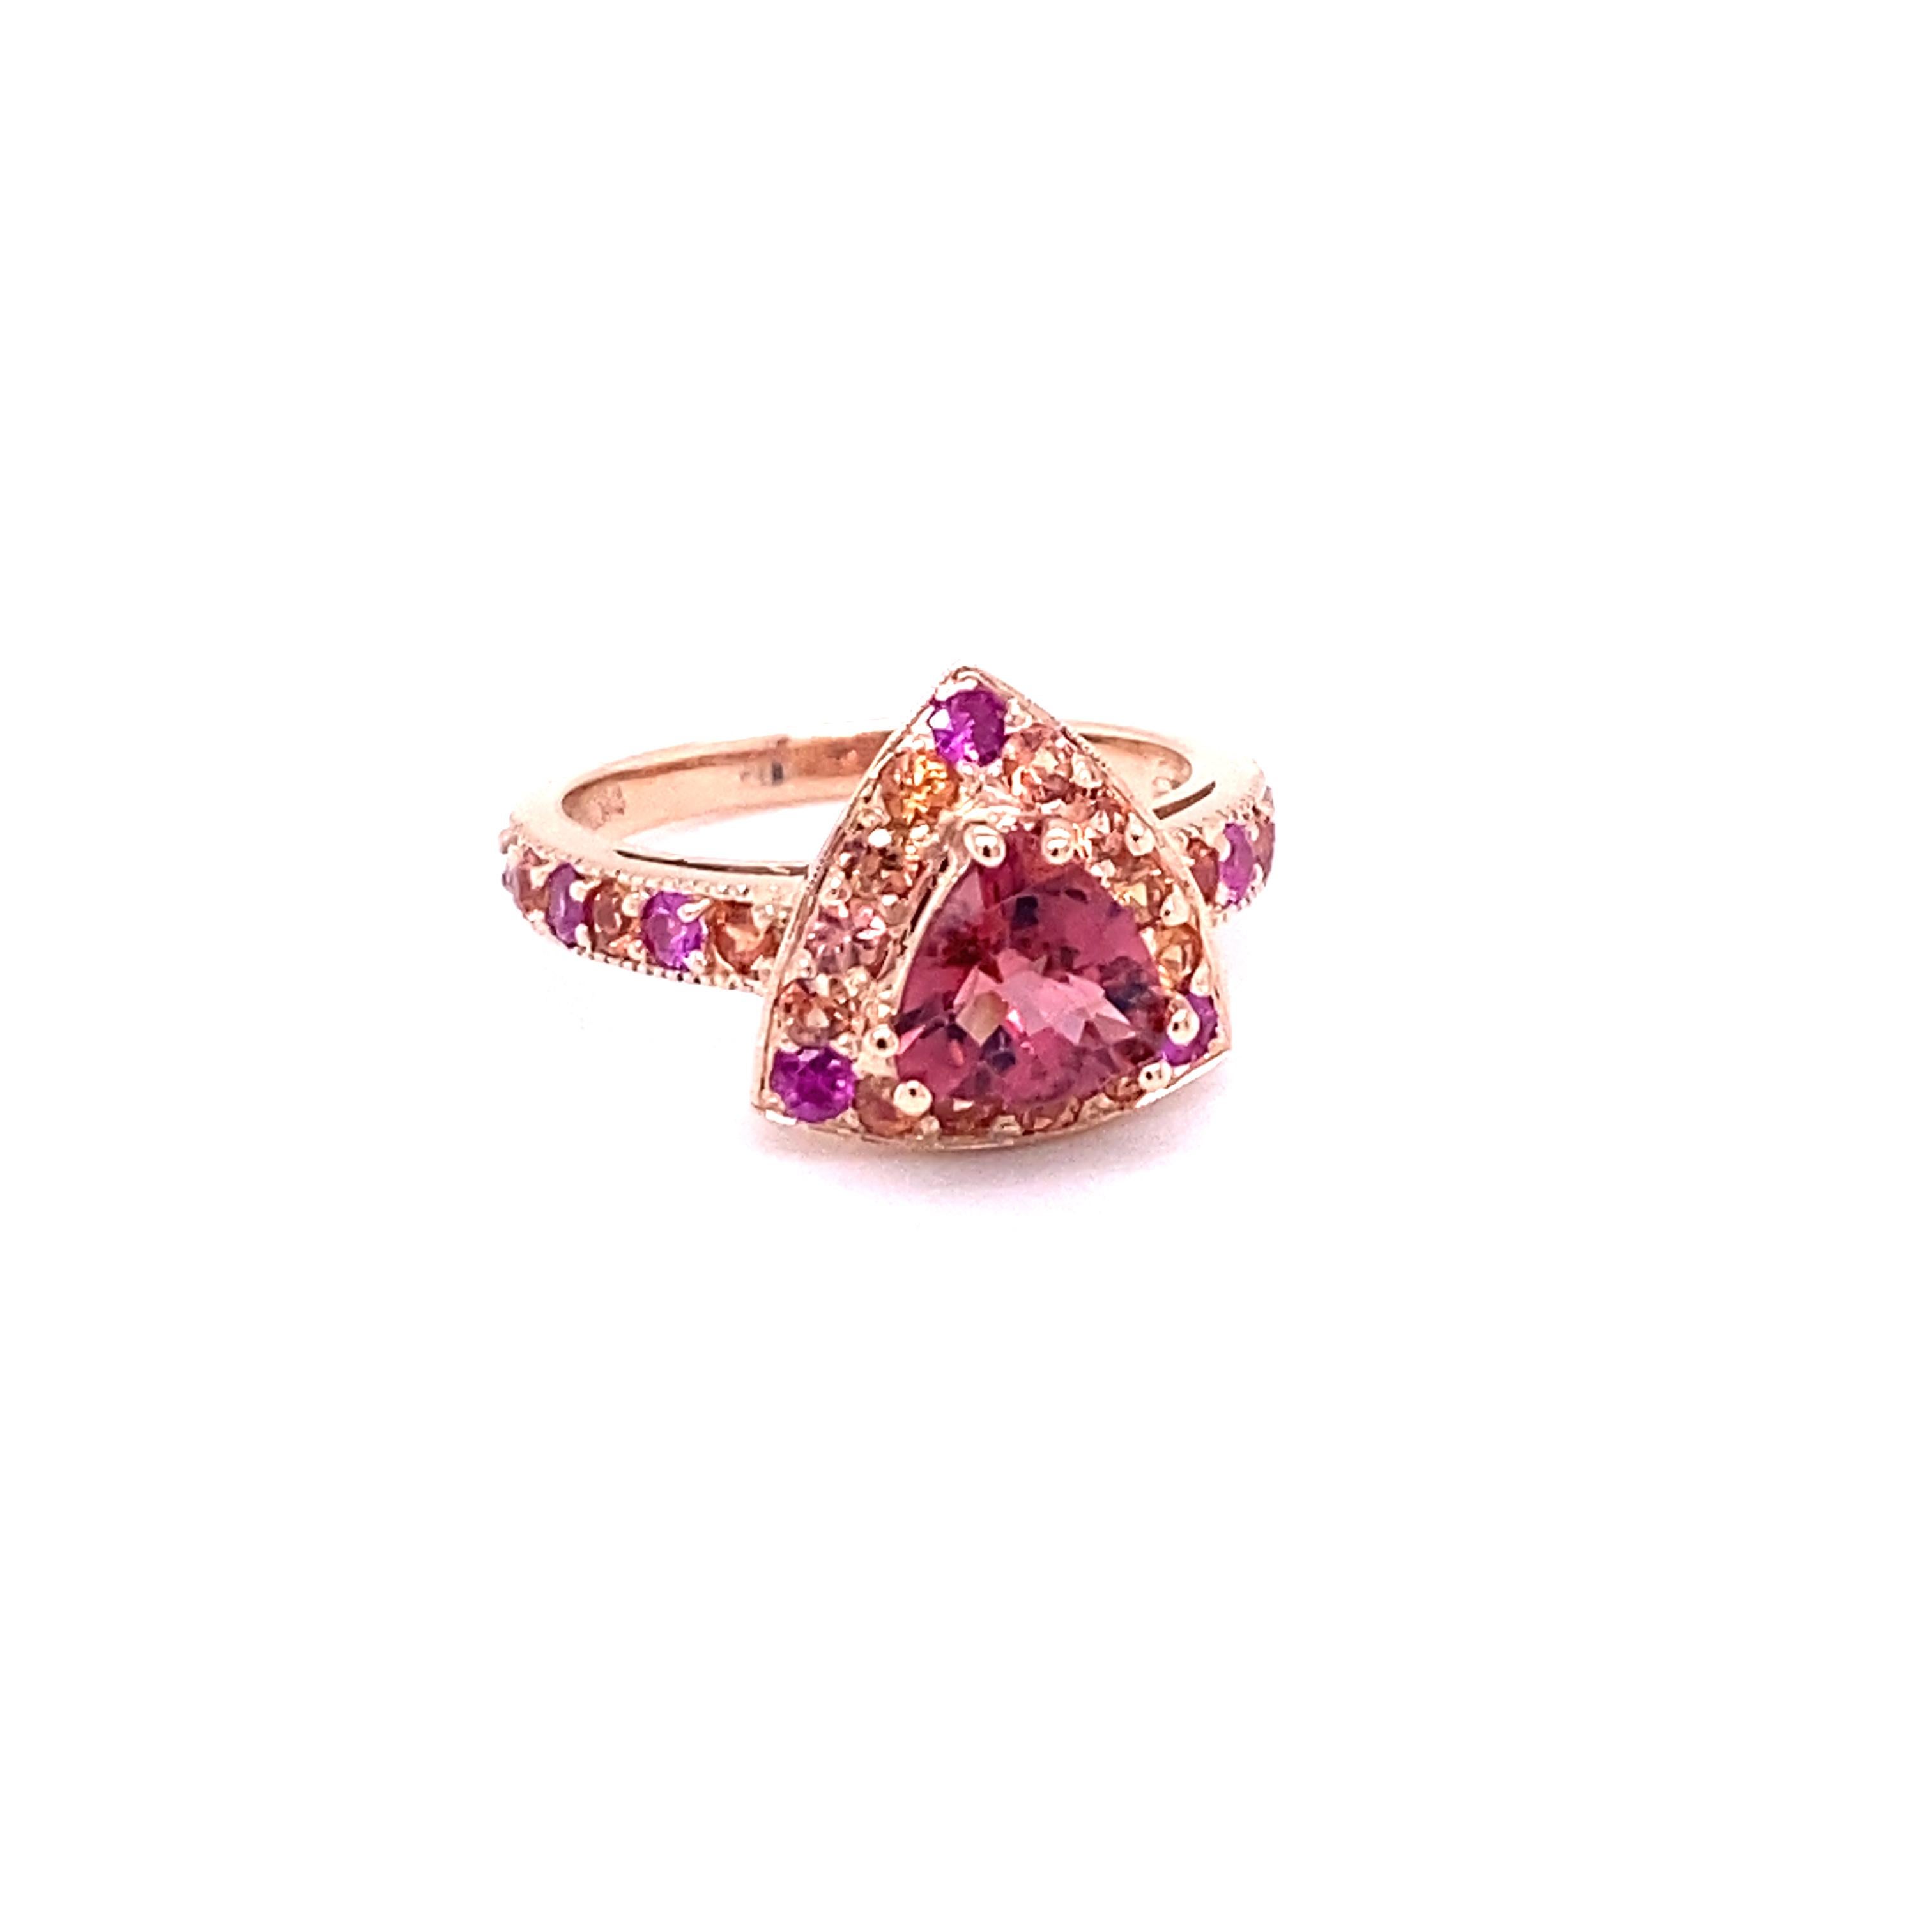 2.31 Carat Tourmaline Sapphire 14 Karat Rose Gold Cocktail Ring

This Ring has a Trillion Cut Tourmaline that weighs 1.20 Carats and is surrounded by 27 Multi Sapphires that weigh 1.11 Carats. The Total Carat weight of this Ring is 2.31 Carats.